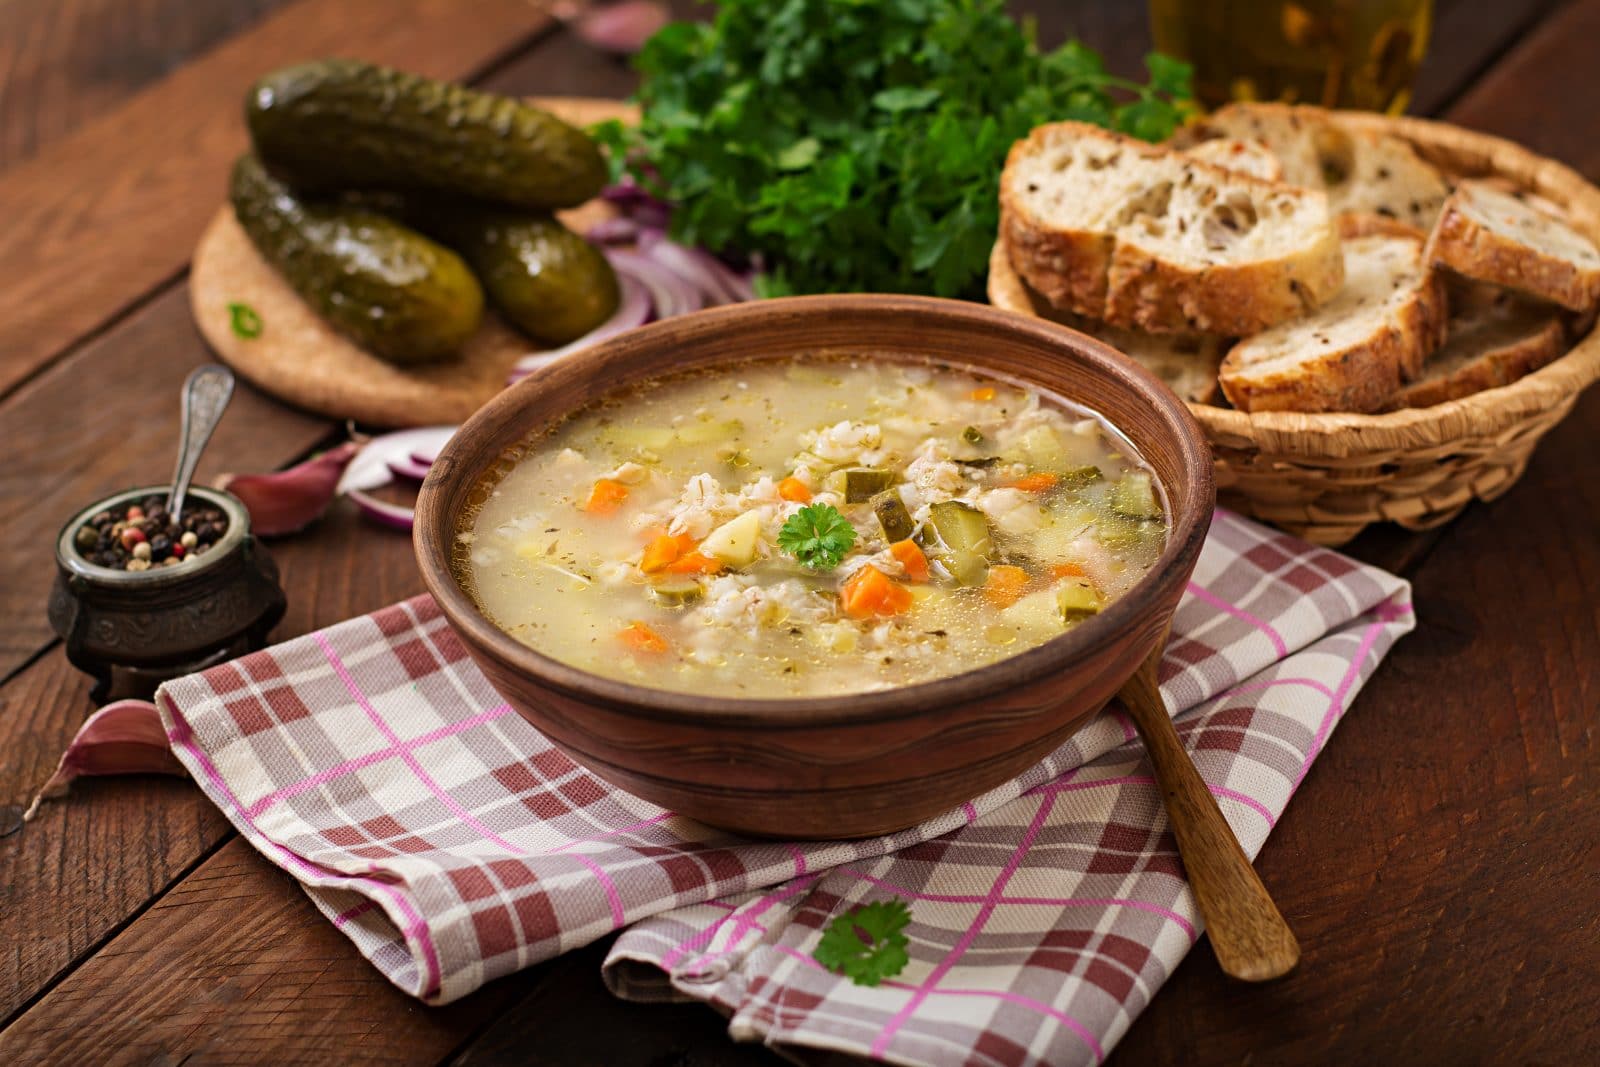 Pearl barley and vegetable soup with sour dough bread